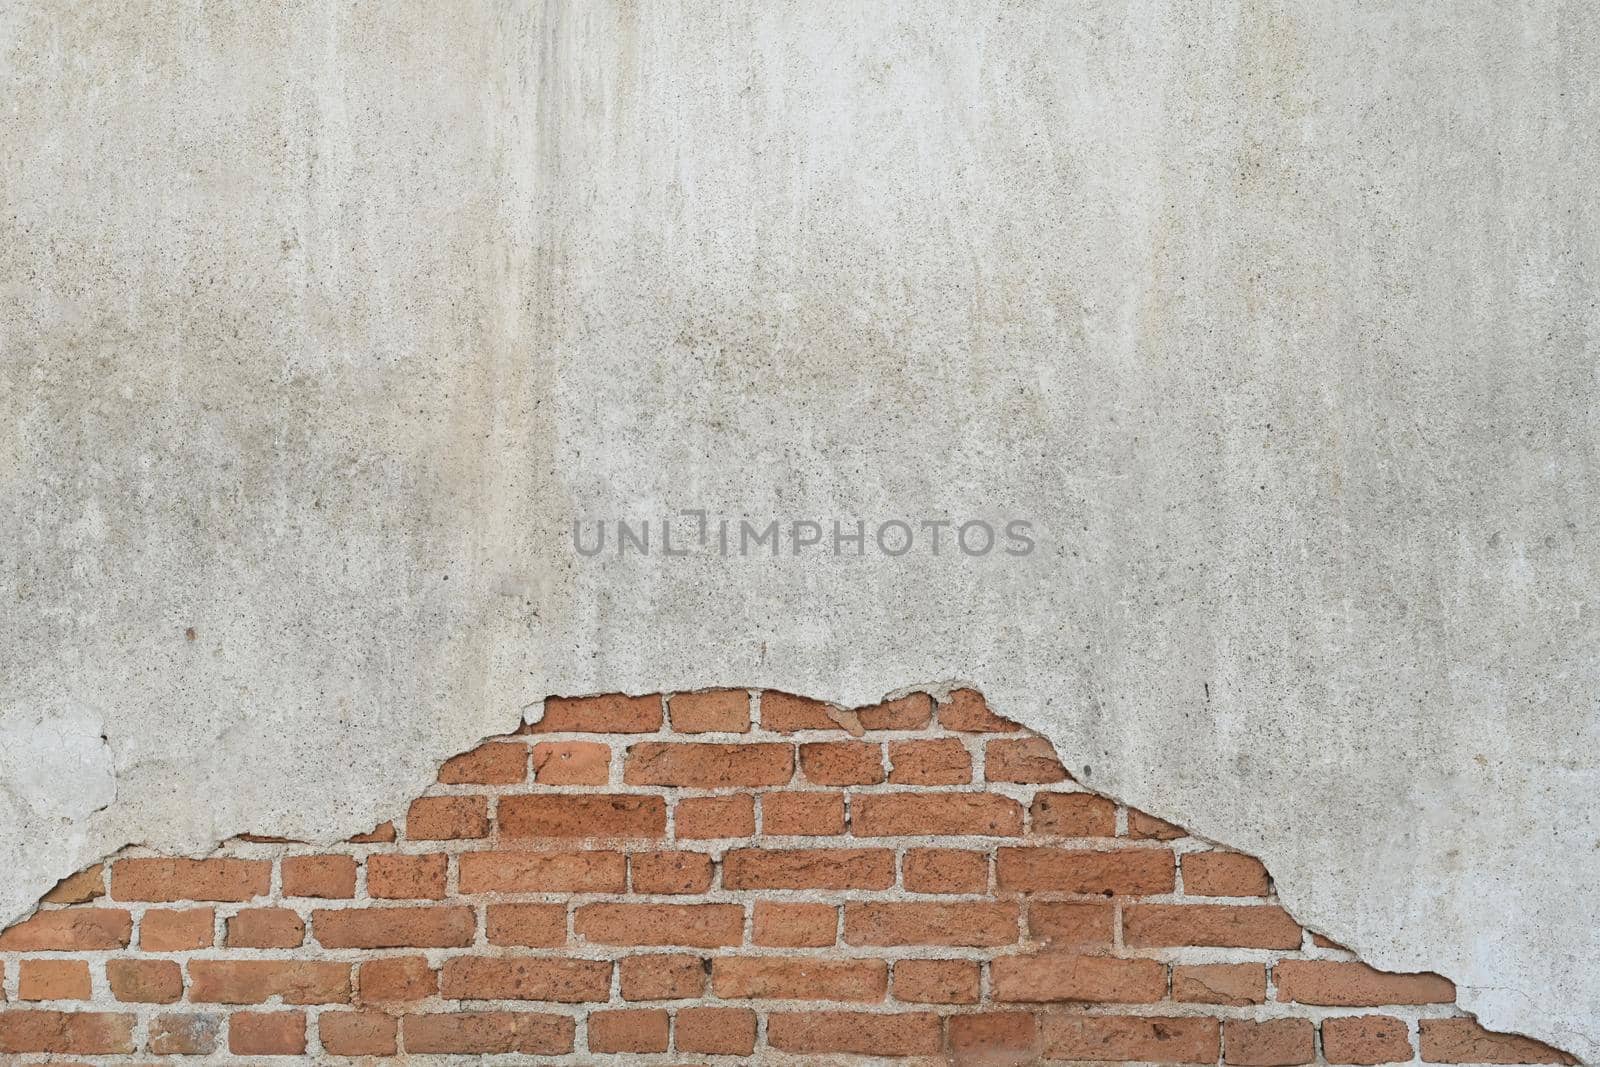 Old brick wall with peeling plaster, grunge background. Copy space for your text.